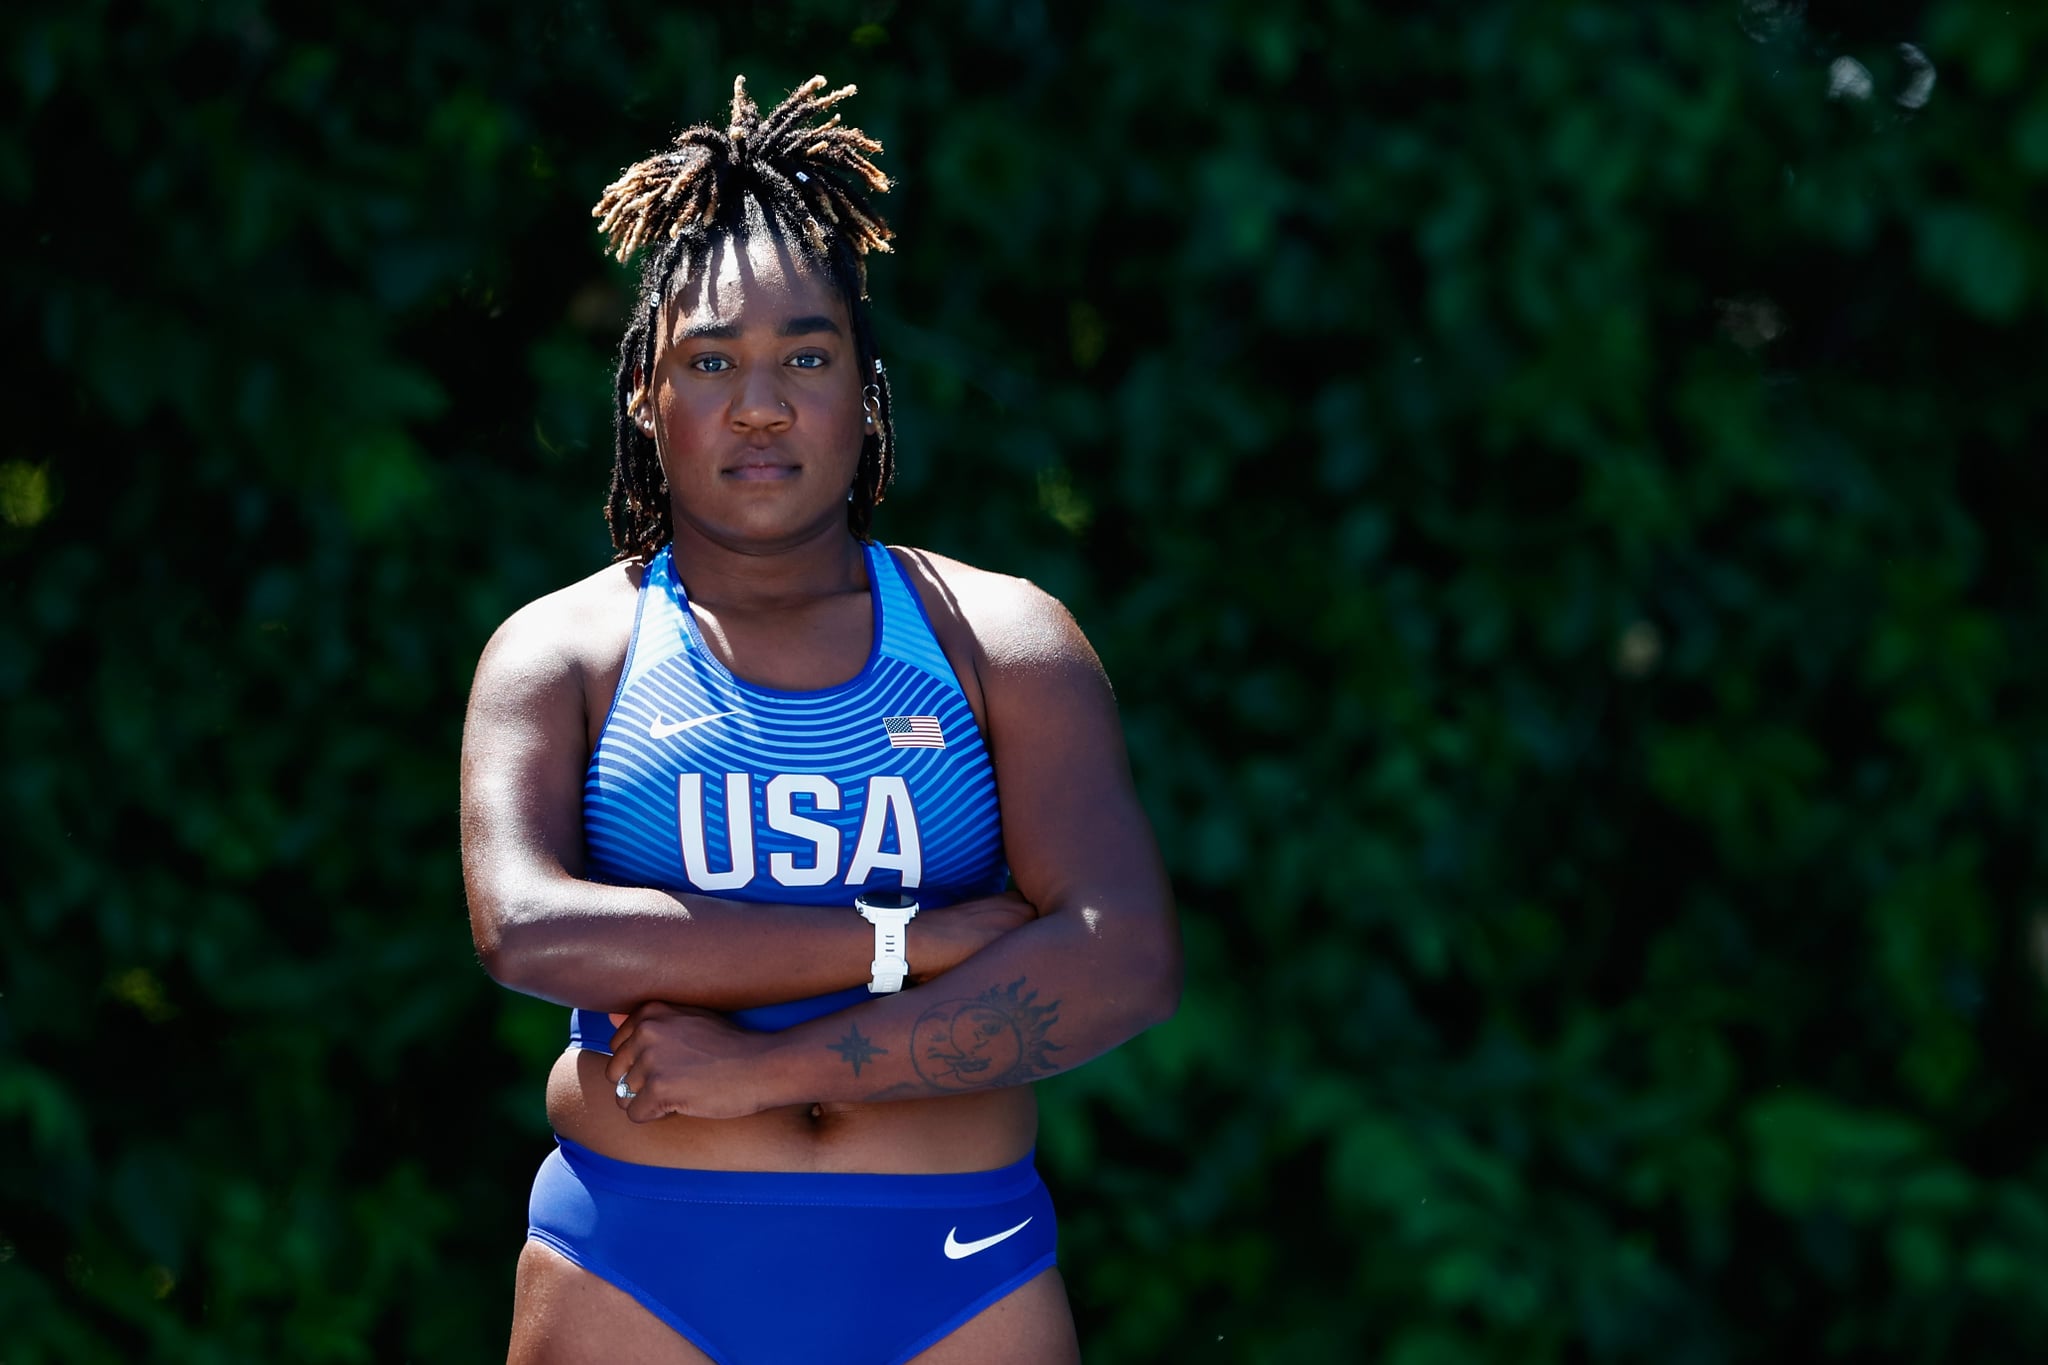 MINNEAPOLIS, MINNESOTA - JUNE 16: United States Paralympic Athlete Deja Young poses for a portrait during a practice session ahead of the 2021 U.S. Paralympic Trials at Breck High School on June 16, 2021 in Minneapolis, Minnesota. (Photo by Christian Petersen/Getty Images)